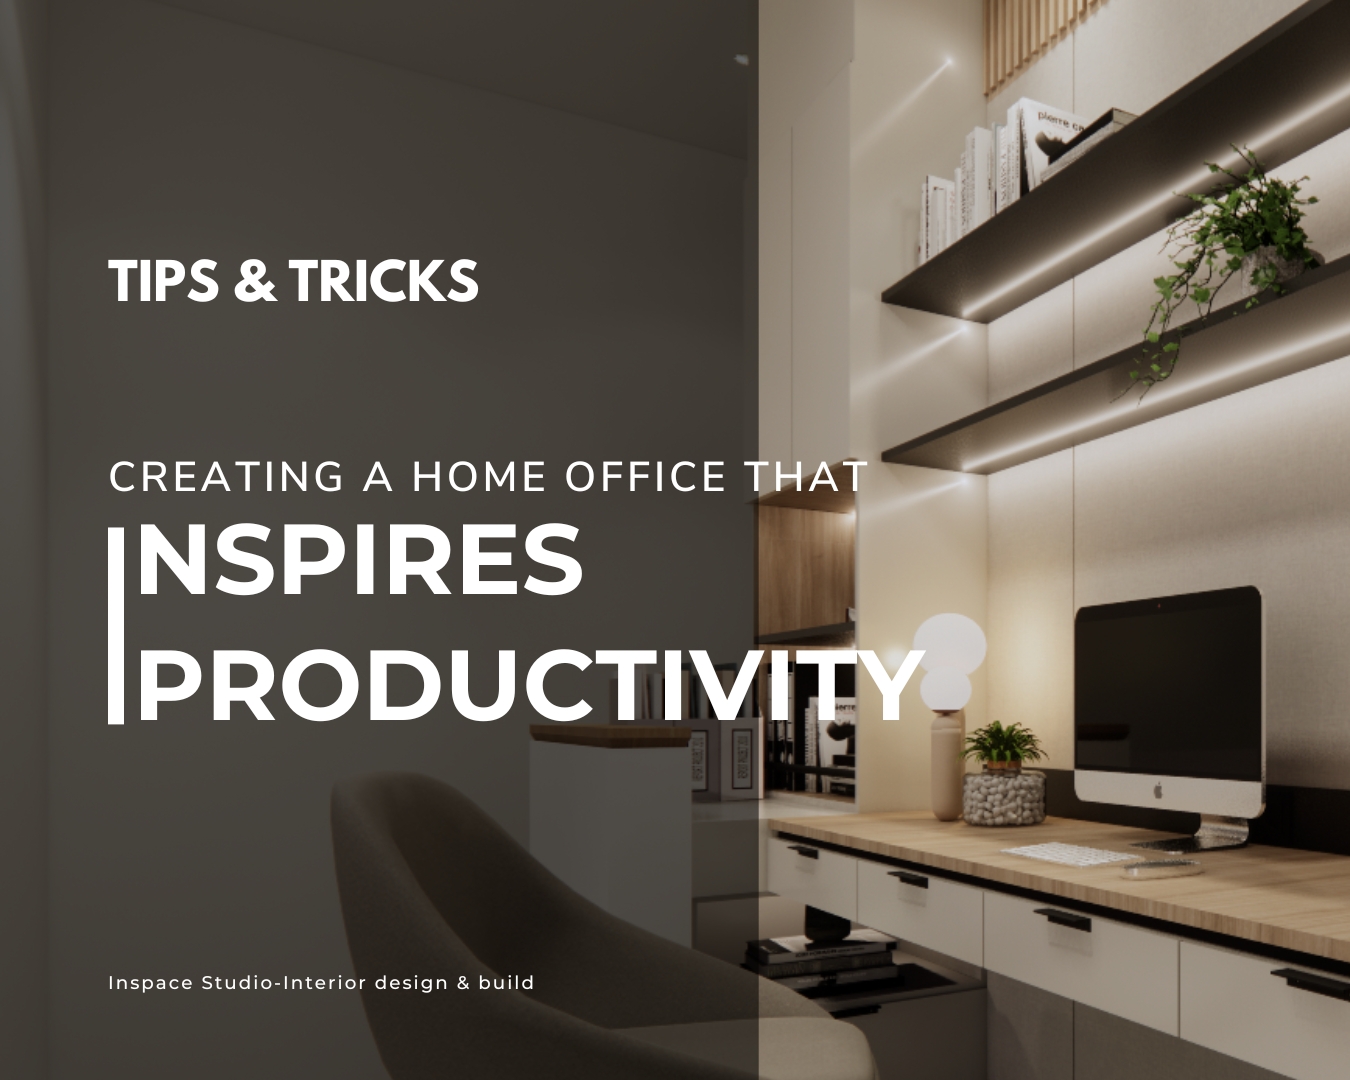 Creating a home office that inspires productivity